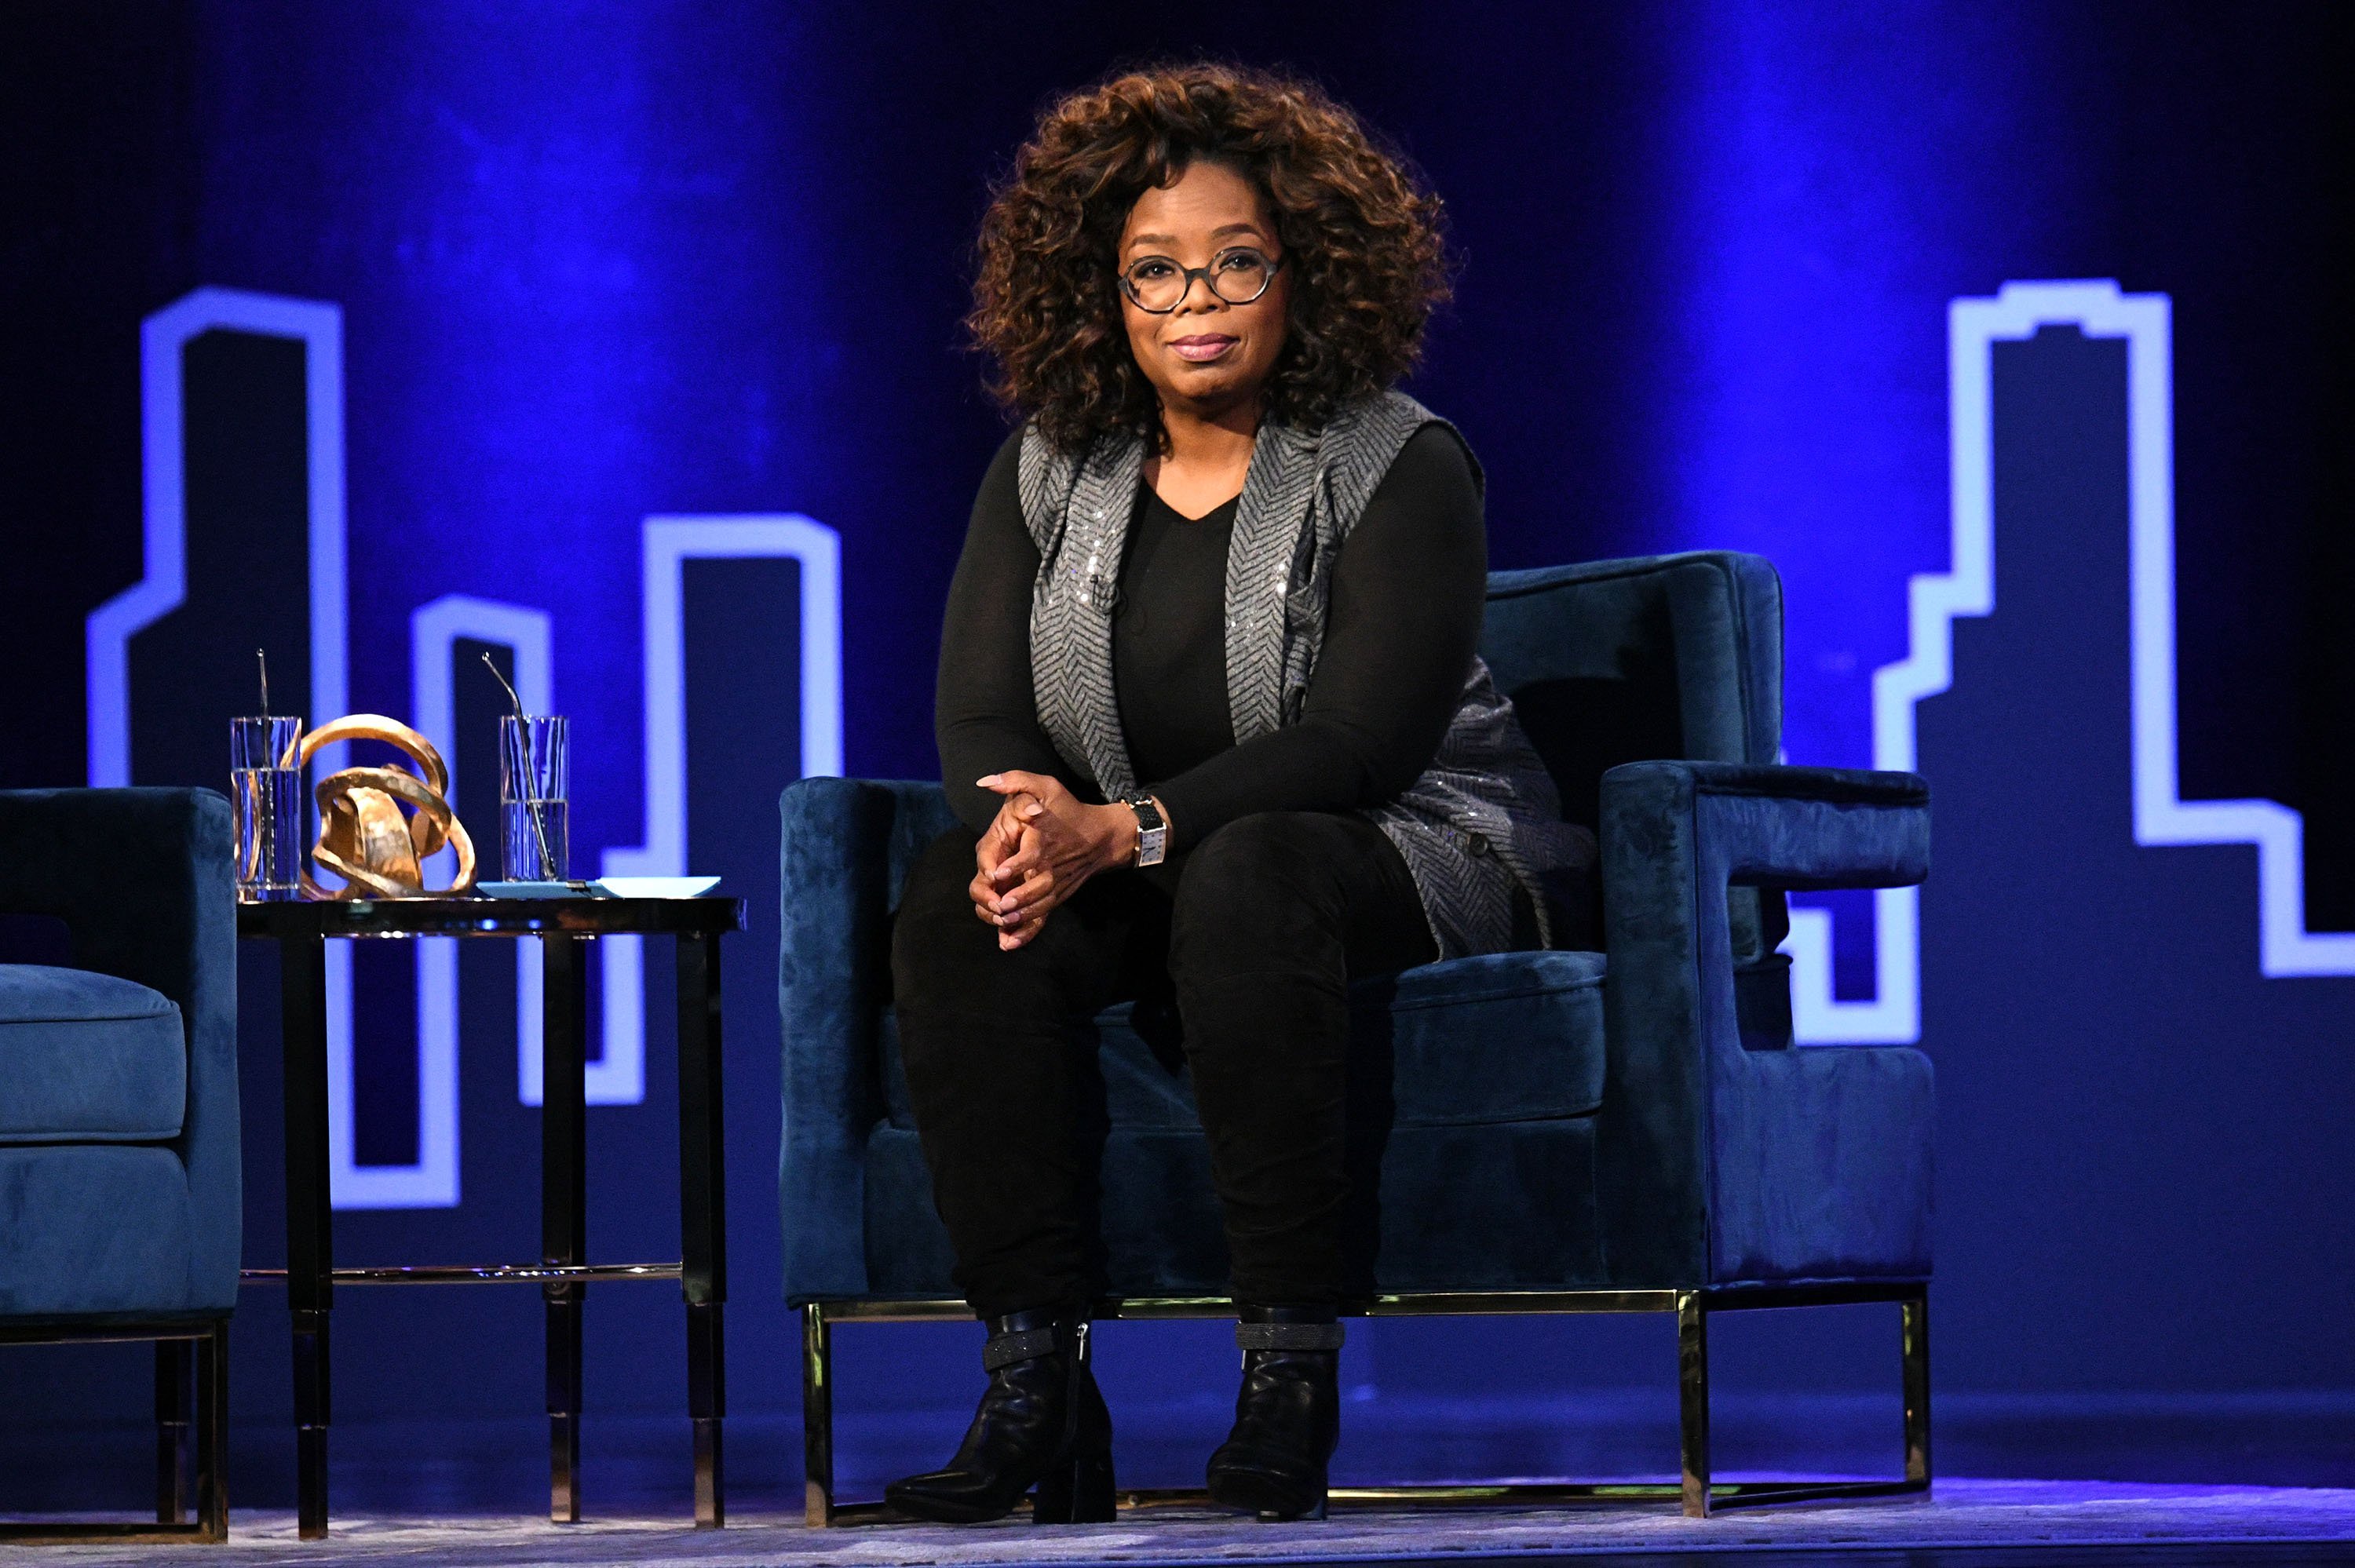 Oprah Winfrey during Oprah's SuperSoul Conversations on Feb. 05, 2019 in New York City | Photo: Getty Images